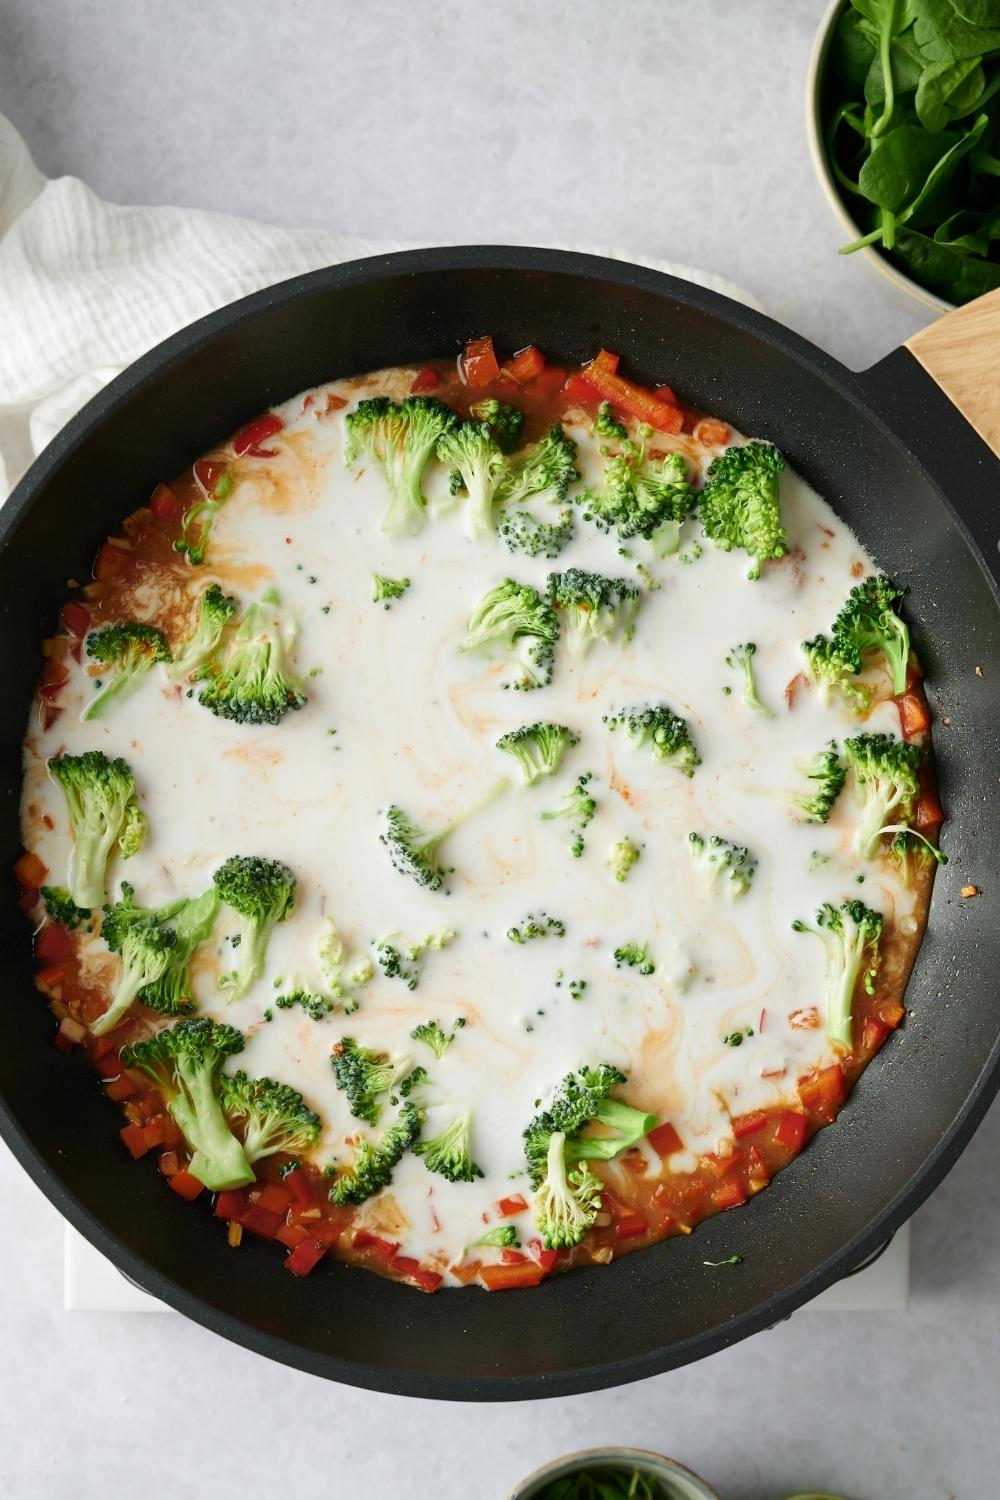 A hot pan with cooked veggies. Coconut milk has just been added.